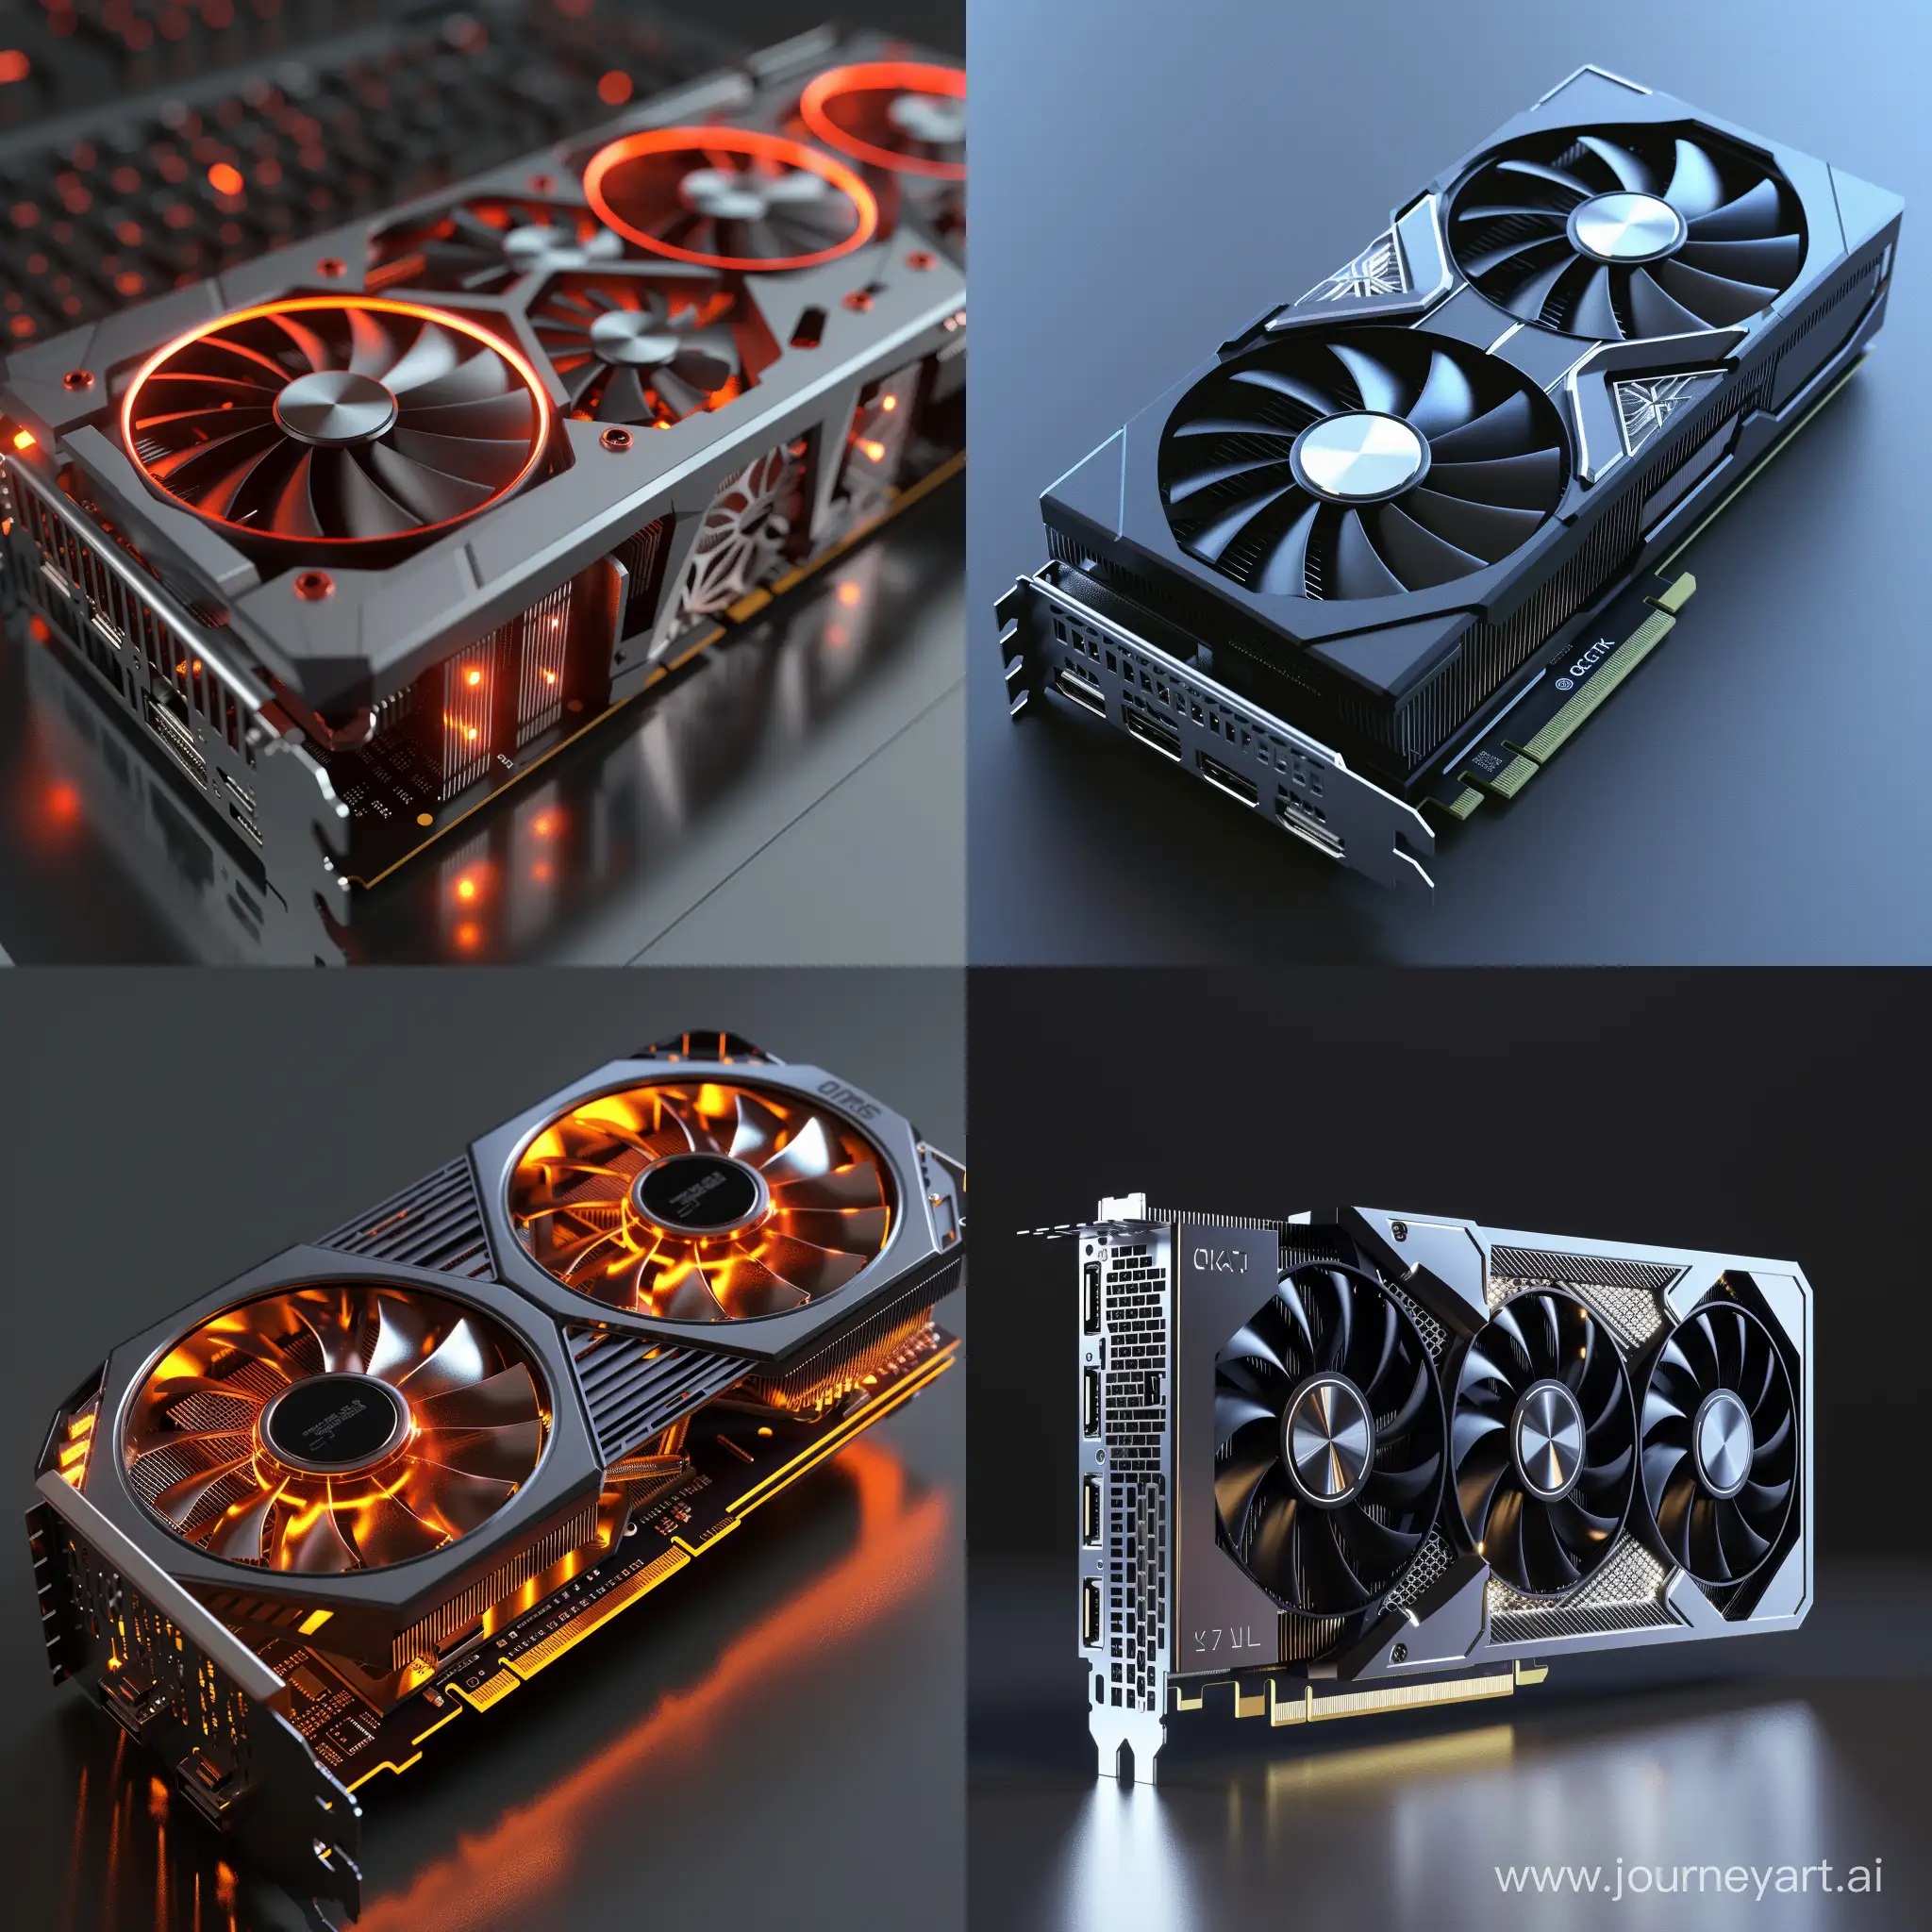 Futuristic-PC-Graphics-Card-Rendering-with-Durable-Composite-Materials